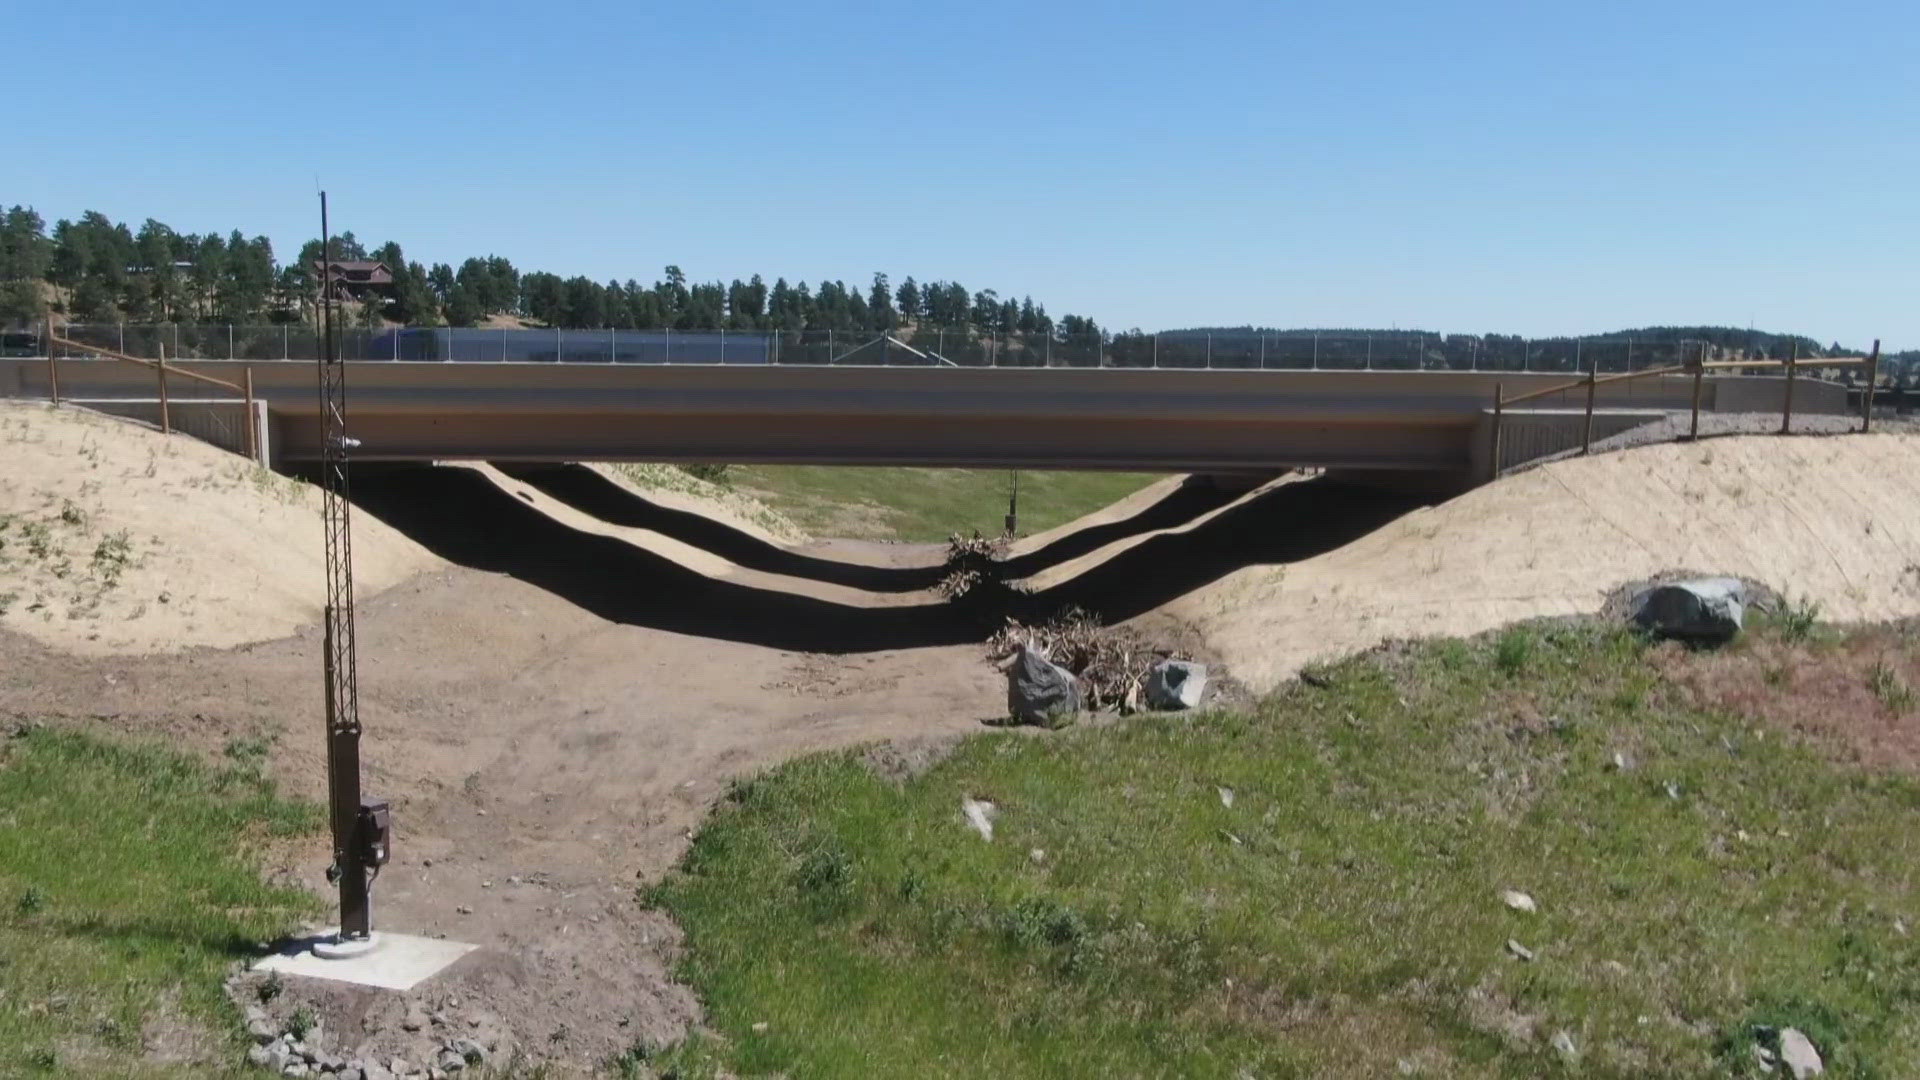 The new underpass will provide better movement for elk, mule deer, black bears, coyotes, mountain lions and bobcats while improving driver safety.